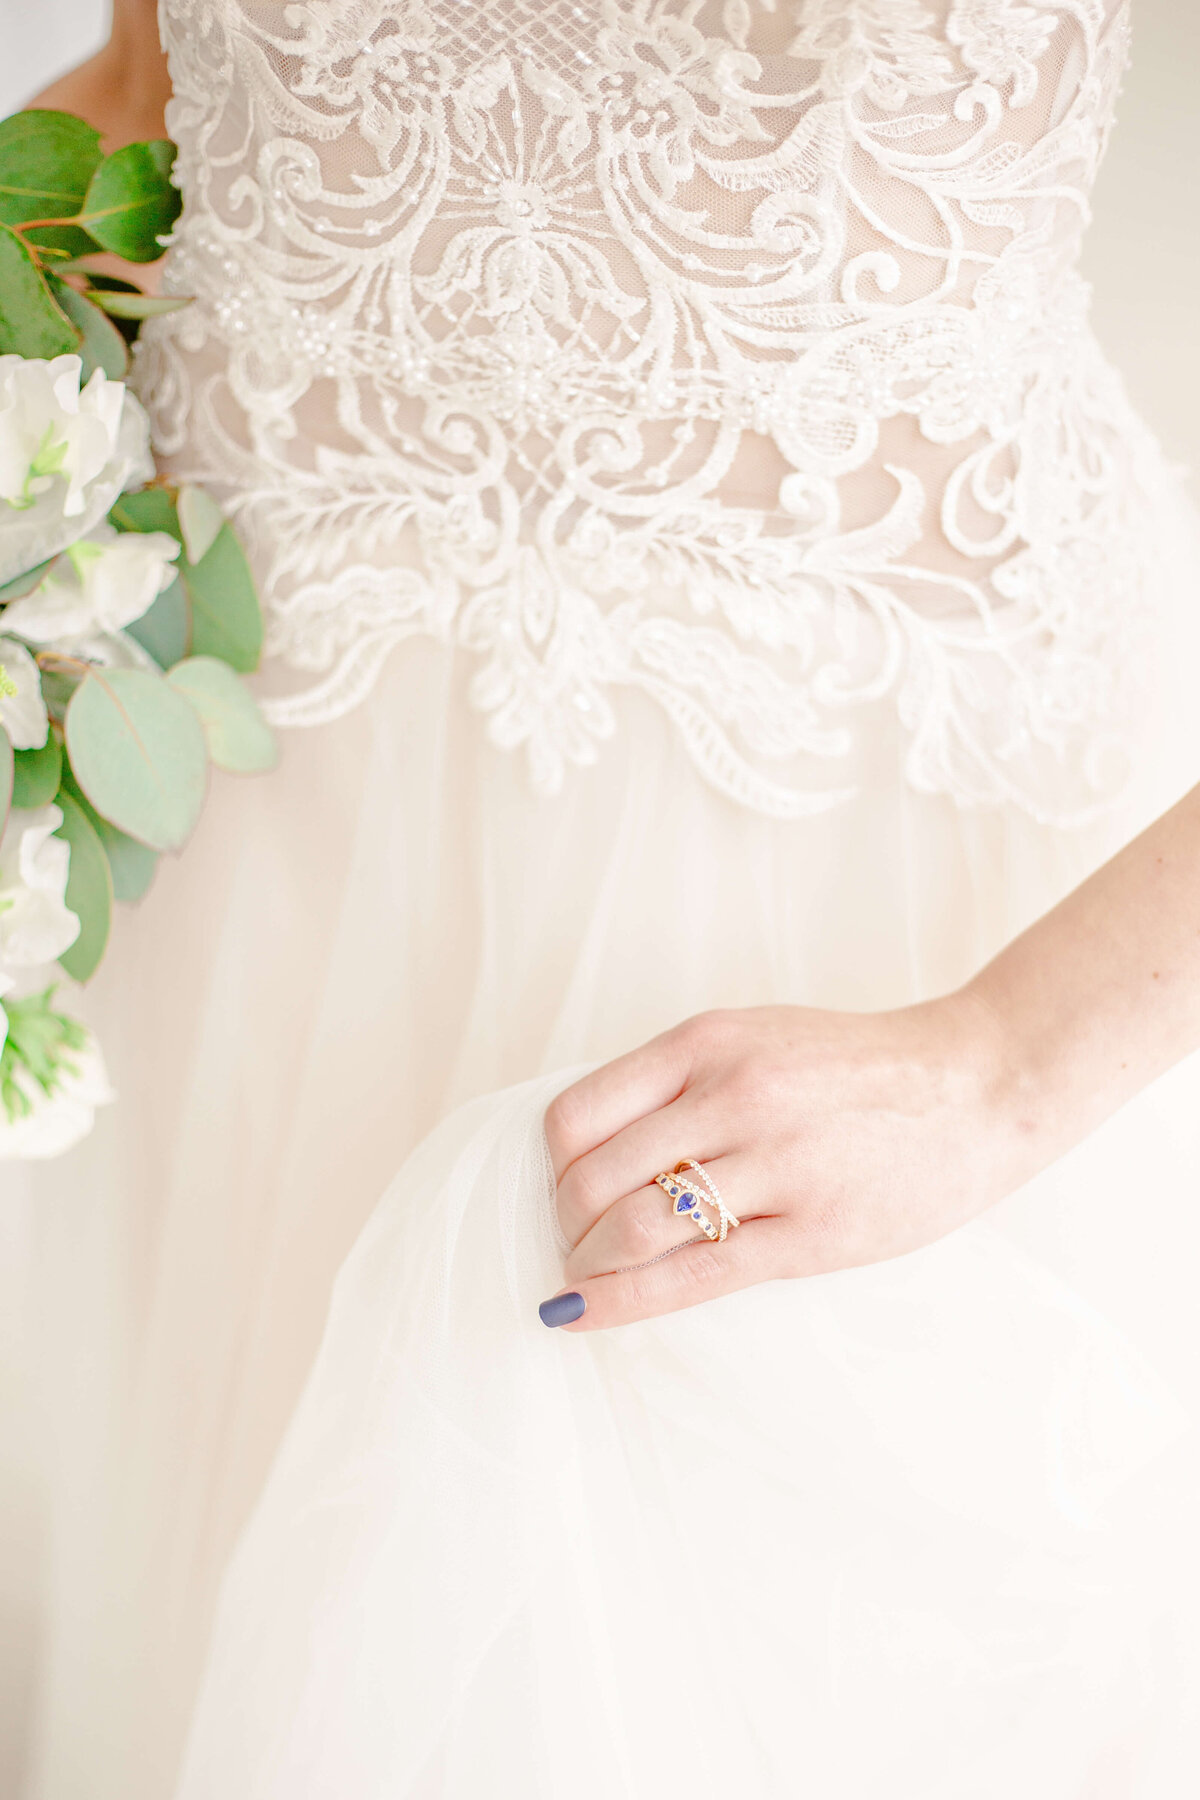 Close-up-of-bridal-gown-rings-wedding-nails-bouquet